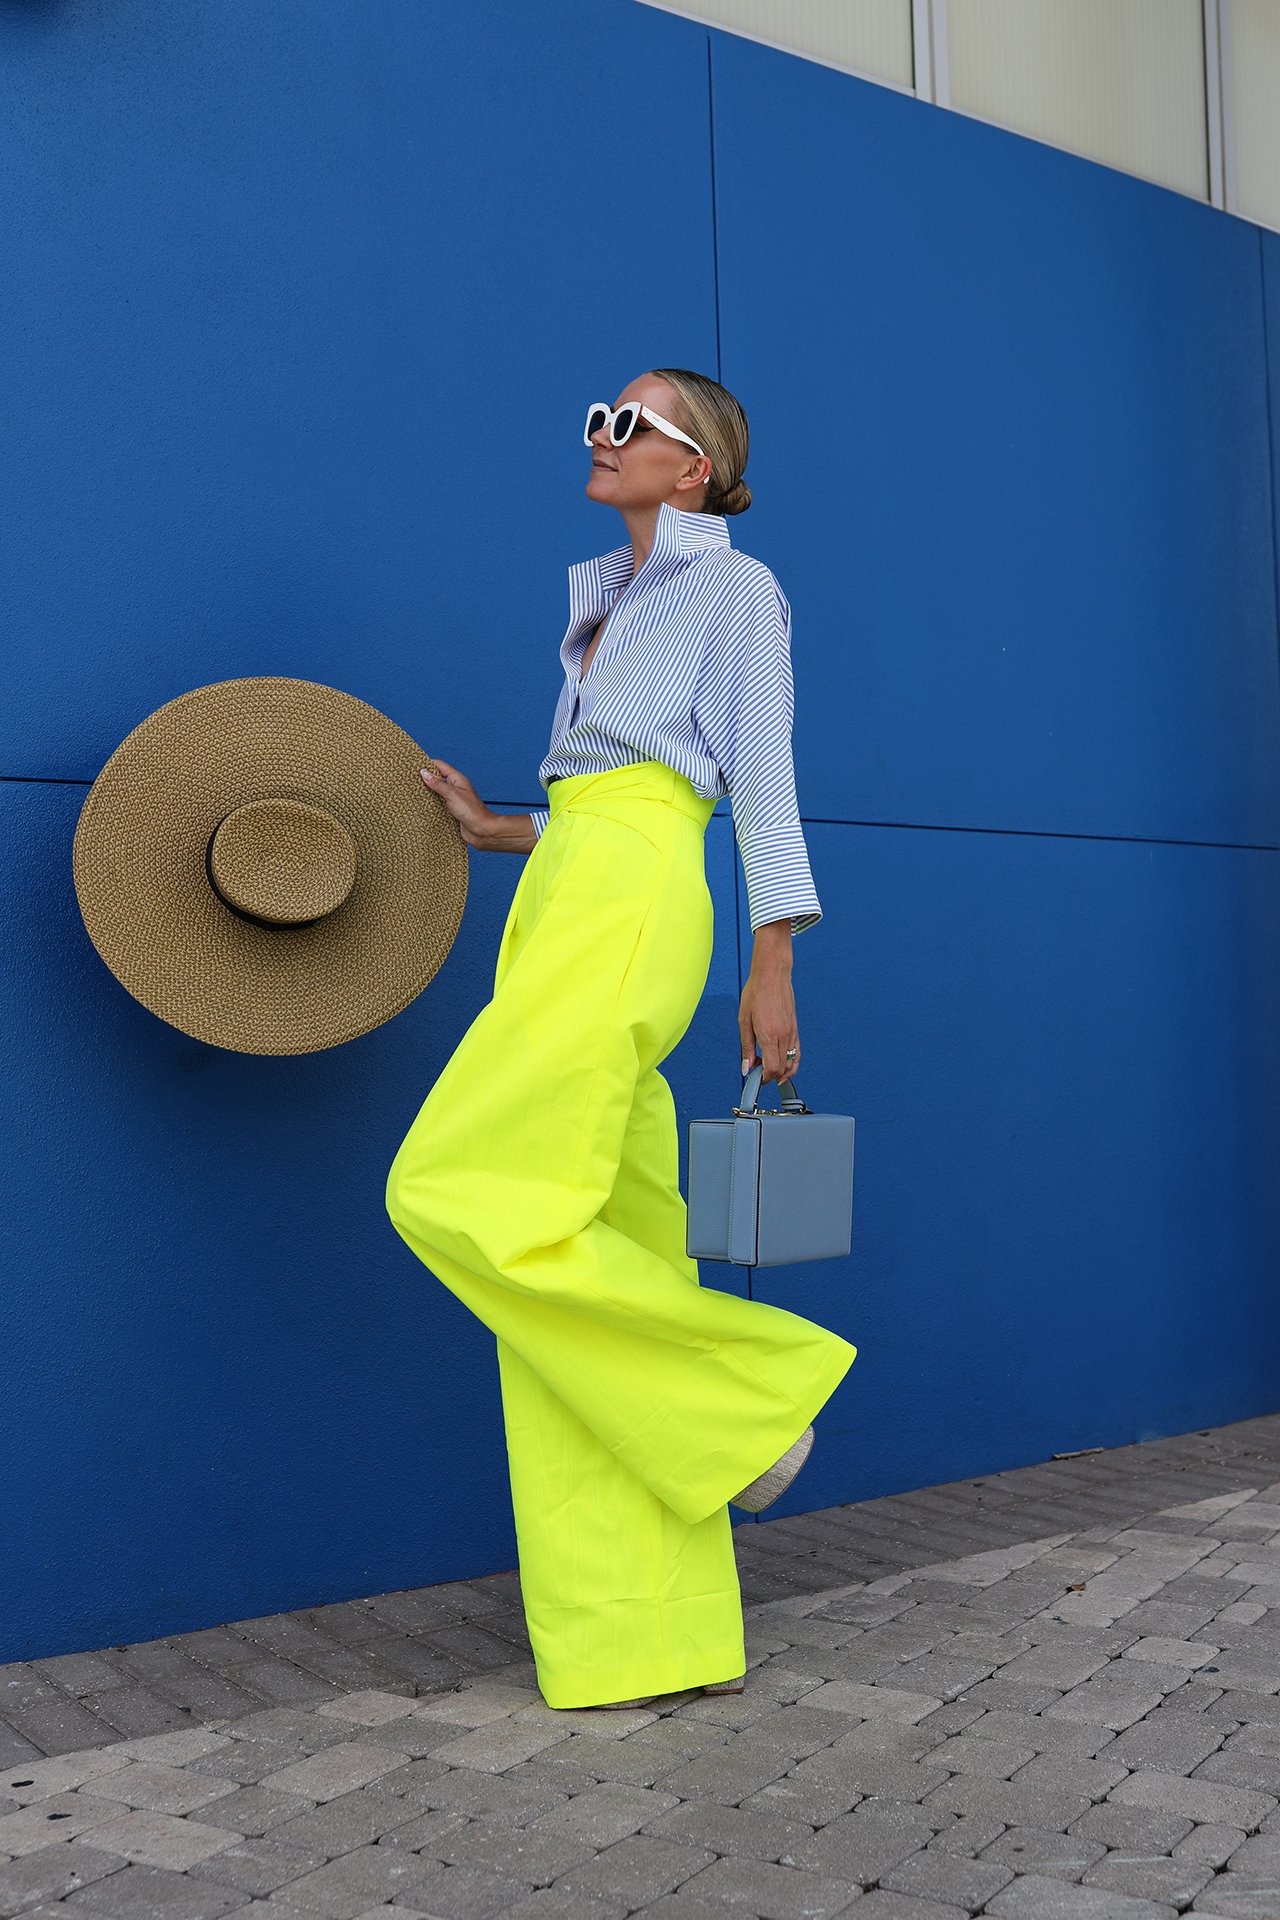 What's the right length for wide-leg pants? — Marcia Crivorot